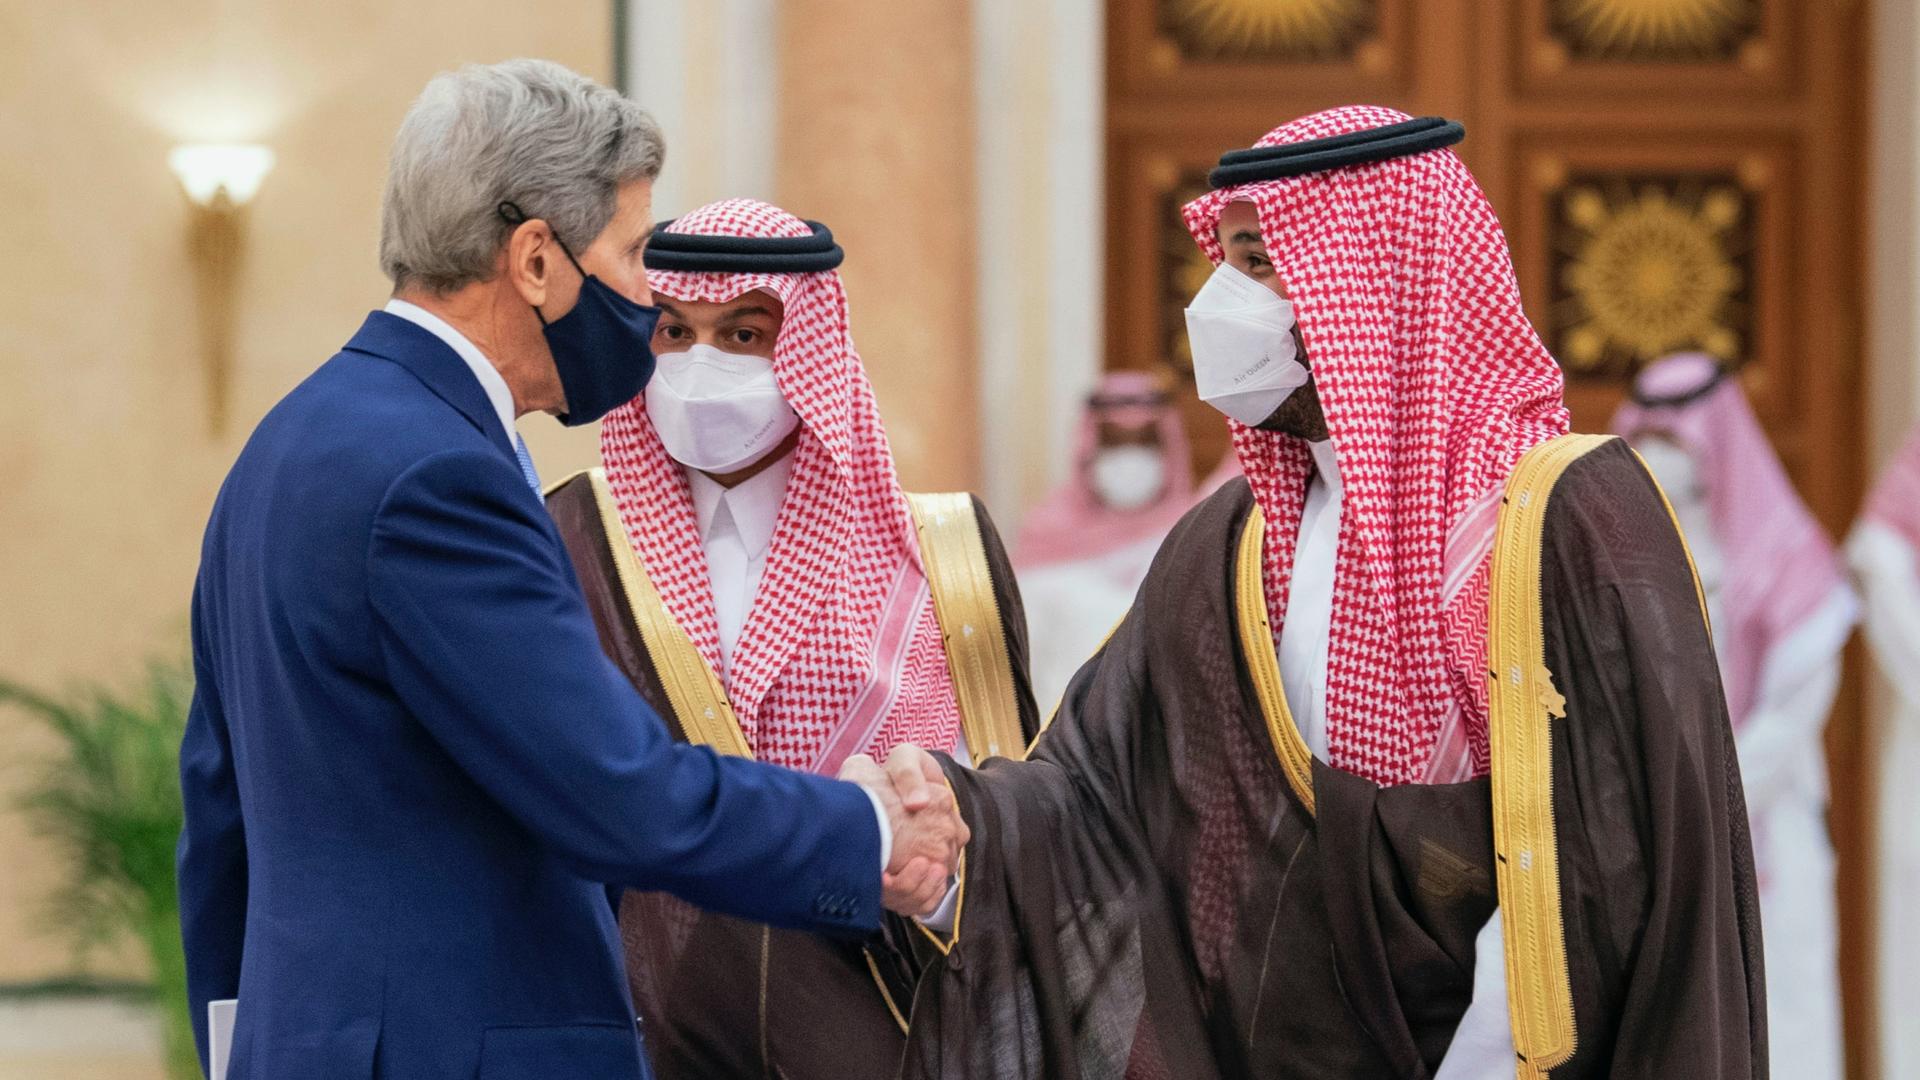 In this photo provided by the Saudi Royal Palace, Saudi Crown Prince Mohammed bin Salman, right, greets US Special Presidential Envoy for Climate John Kerry during the Green Initiative Summit in Riyadh, Saudi Arabia, Oct. 25, 2021.